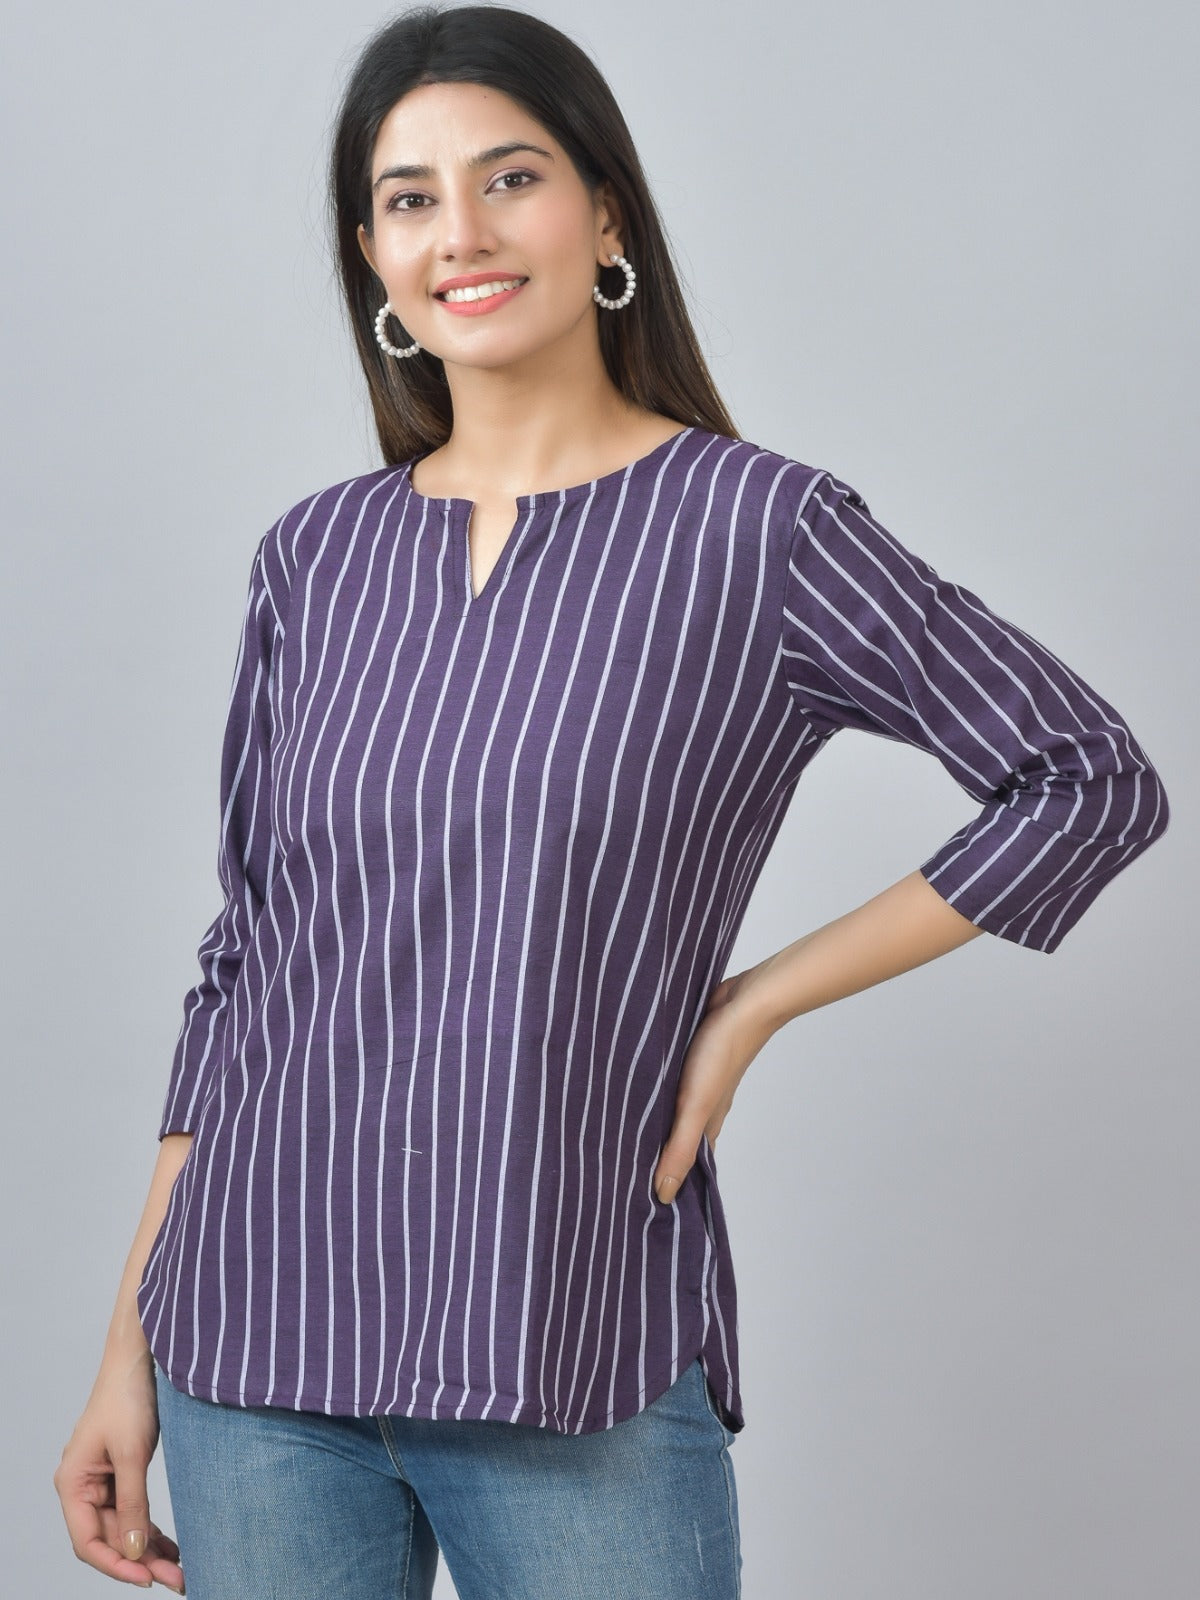 Pack Of 2 Dark Blue And Dark Purple Striped Cotton Womens Top Combo